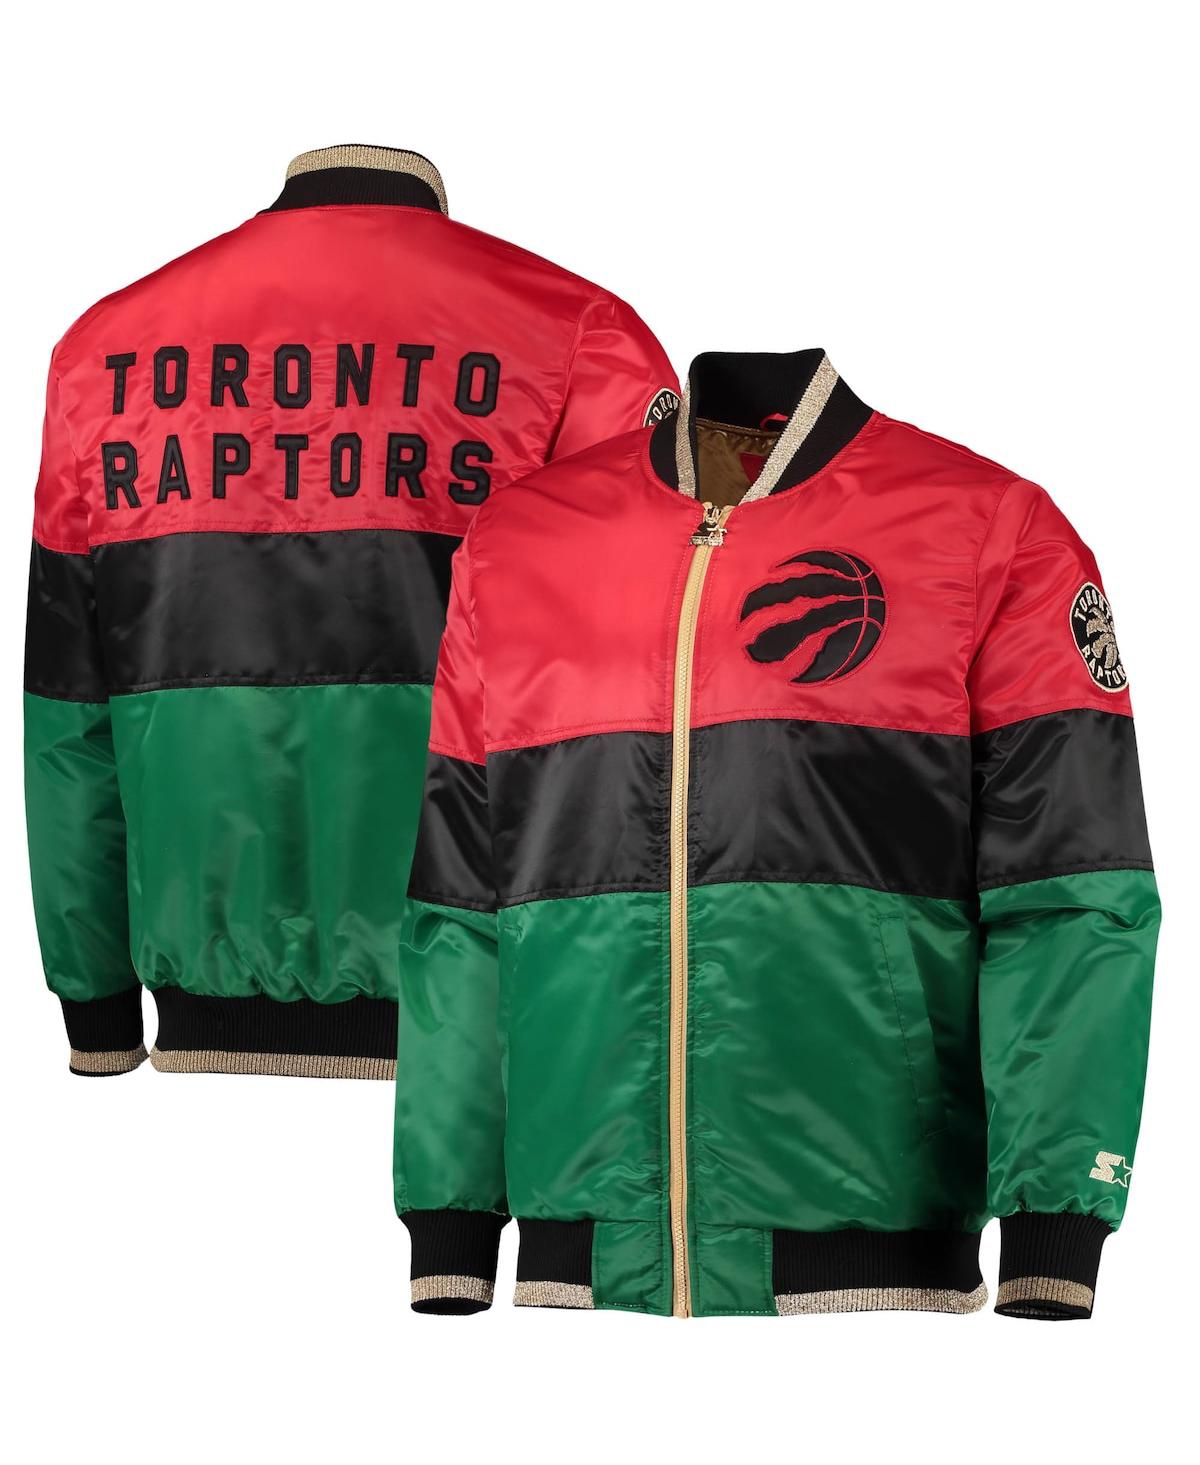 Men's Starter Red and Black and Green Toronto Raptors Black History Month Nba 75th Anniversary Full-Zip Jacket - Red, Black, Green